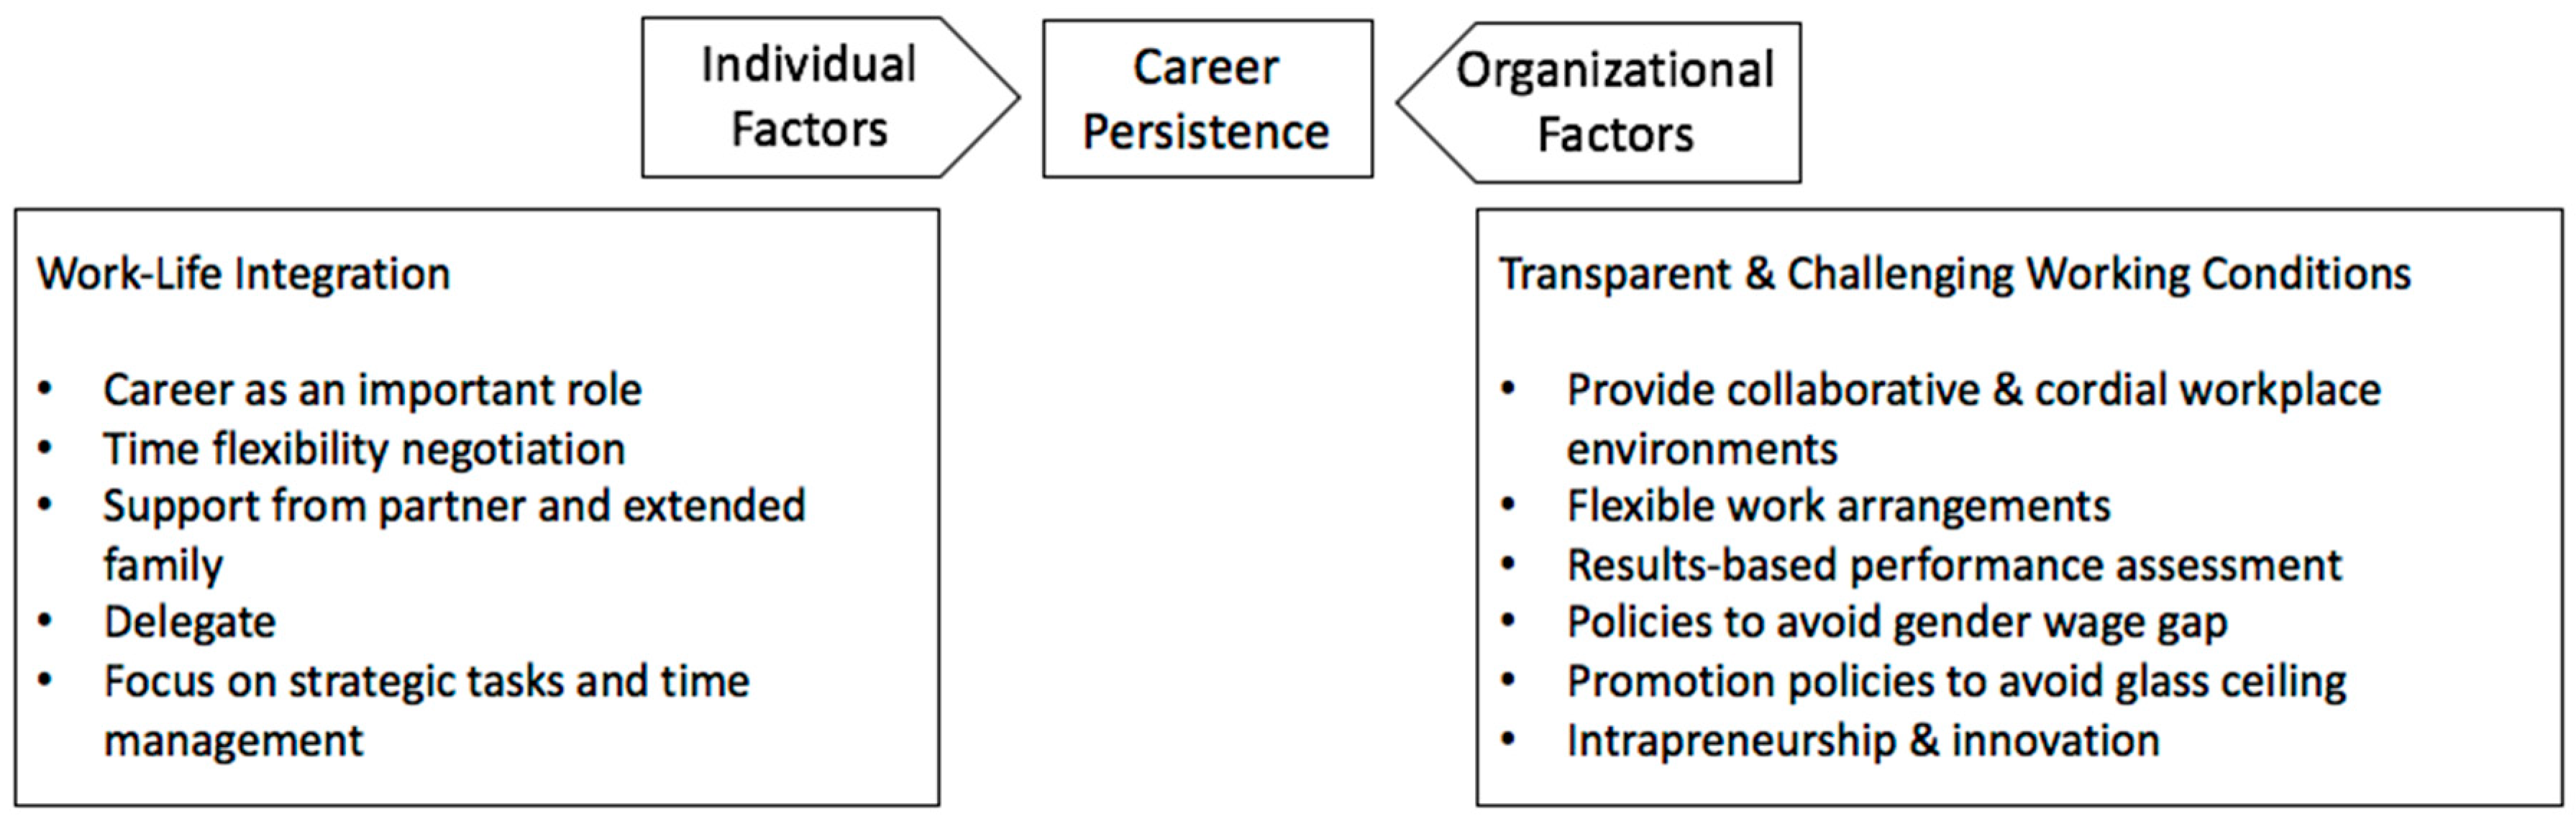 Administrative Sciences | Free Full-Text | Opening the “Black Box”. Factors  Affecting Women's Journey to Top Management Positions: A Framework Applied  to Chile | HTML